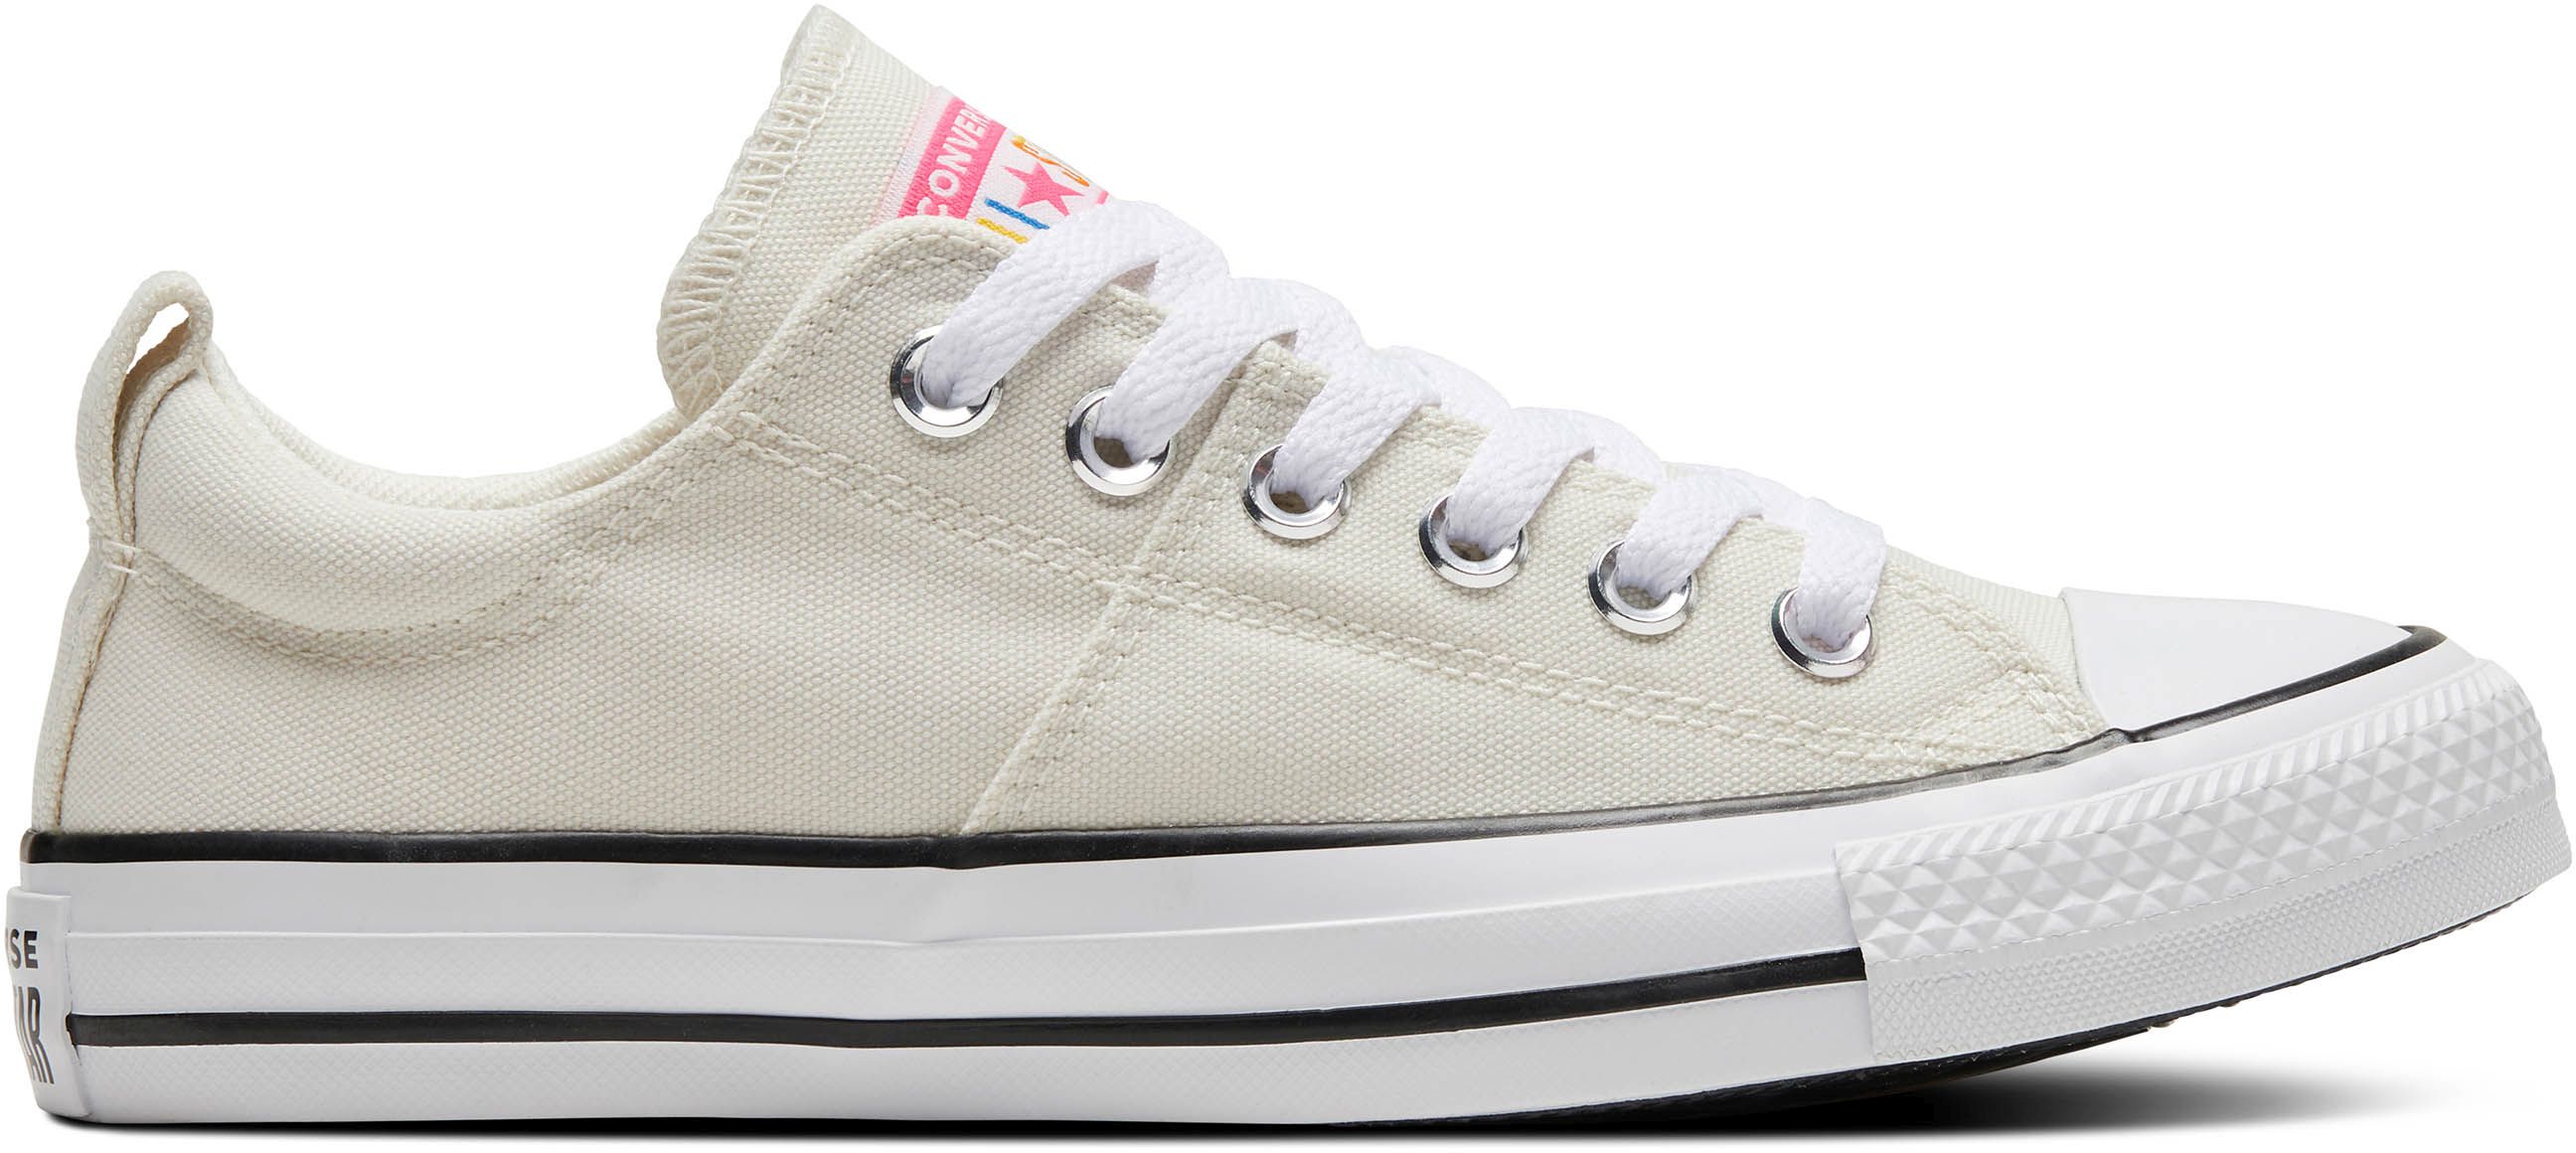 converse chuck taylor all star madison womens sneakers